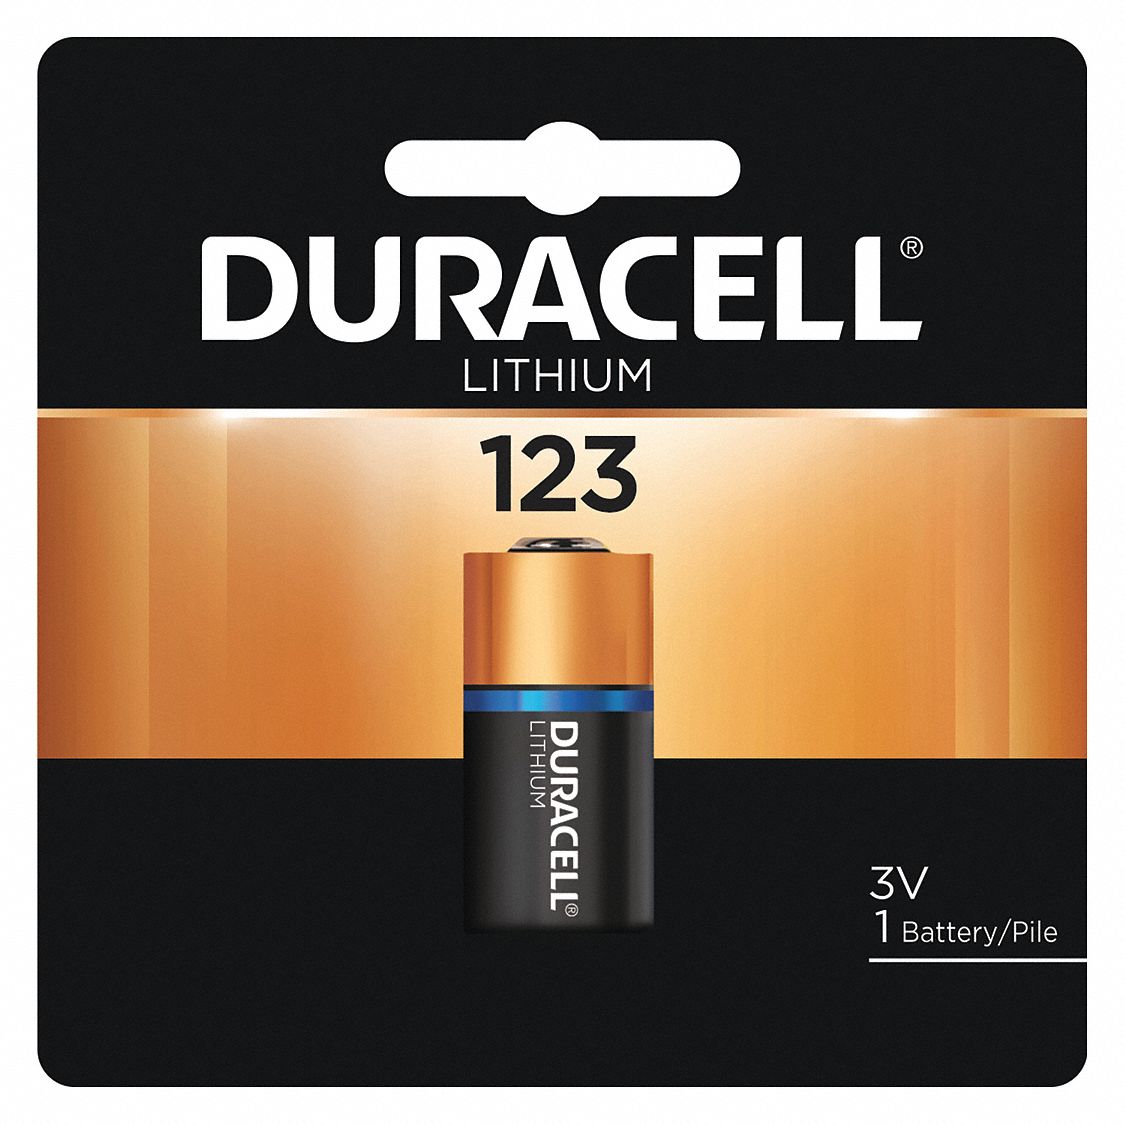 DURACELL, 123 Battery Size, Lithium, Battery - 1ANB7